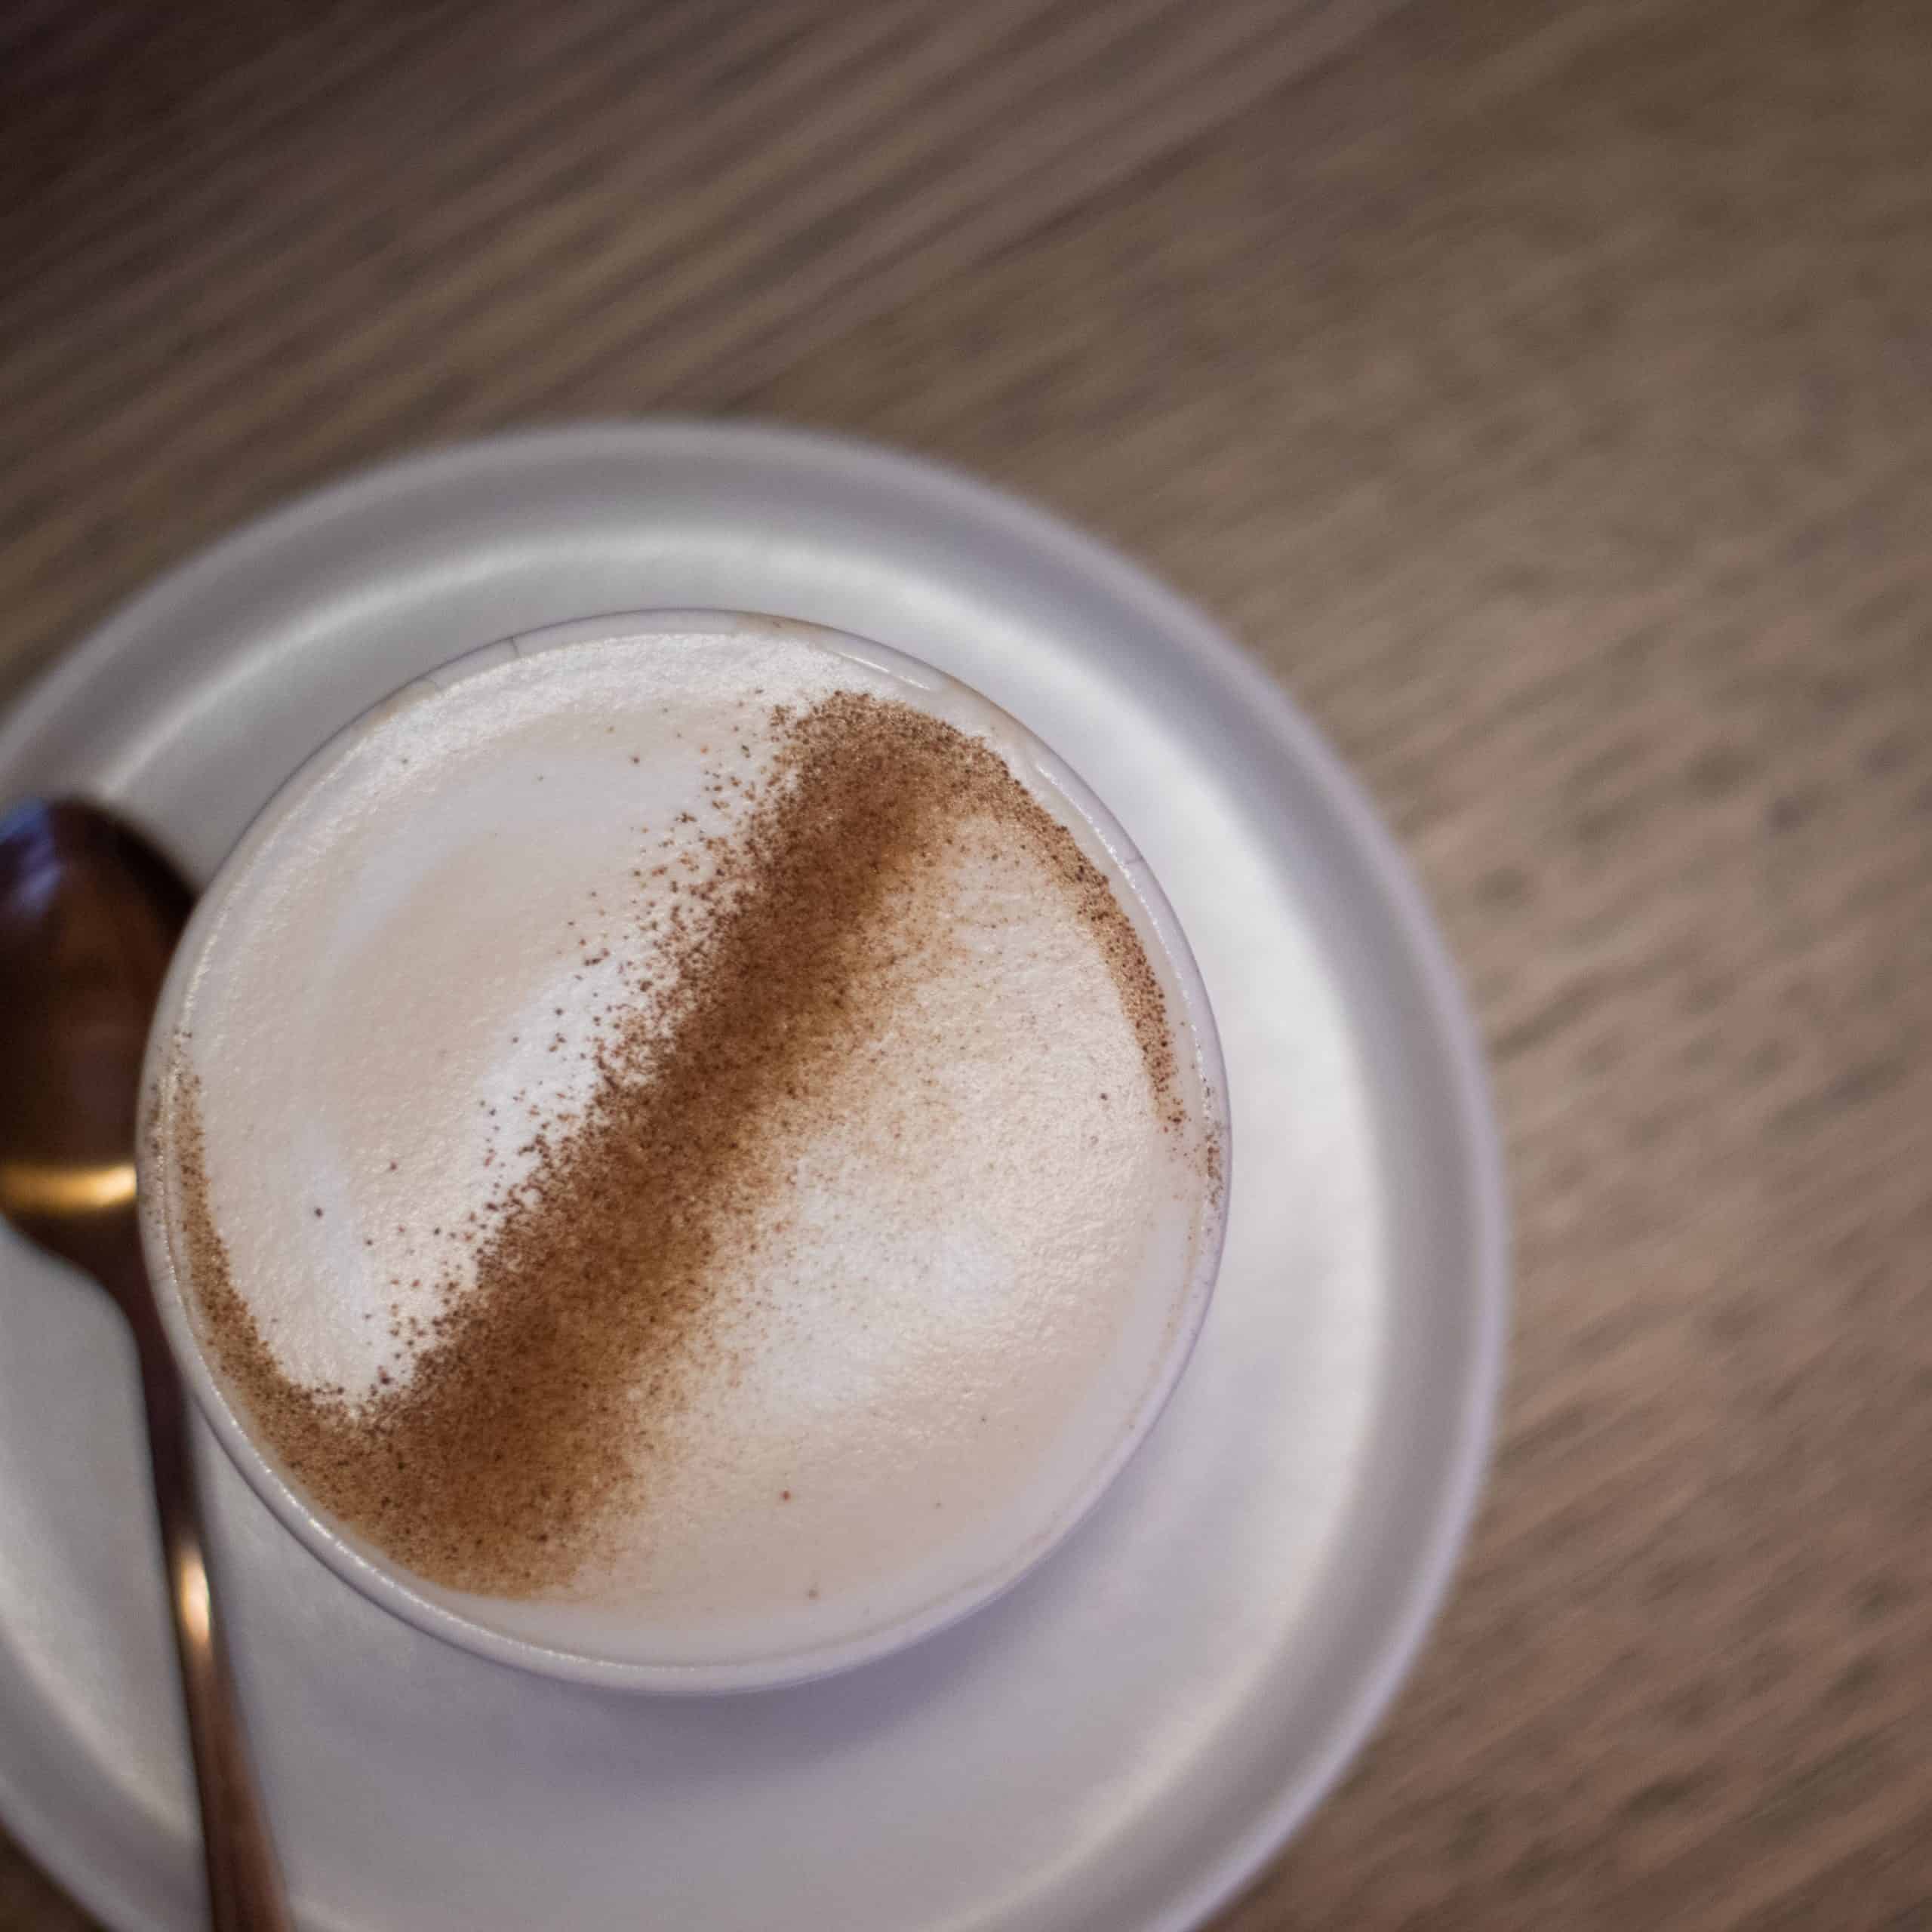 Our tips to make the most addictive chai latte at home